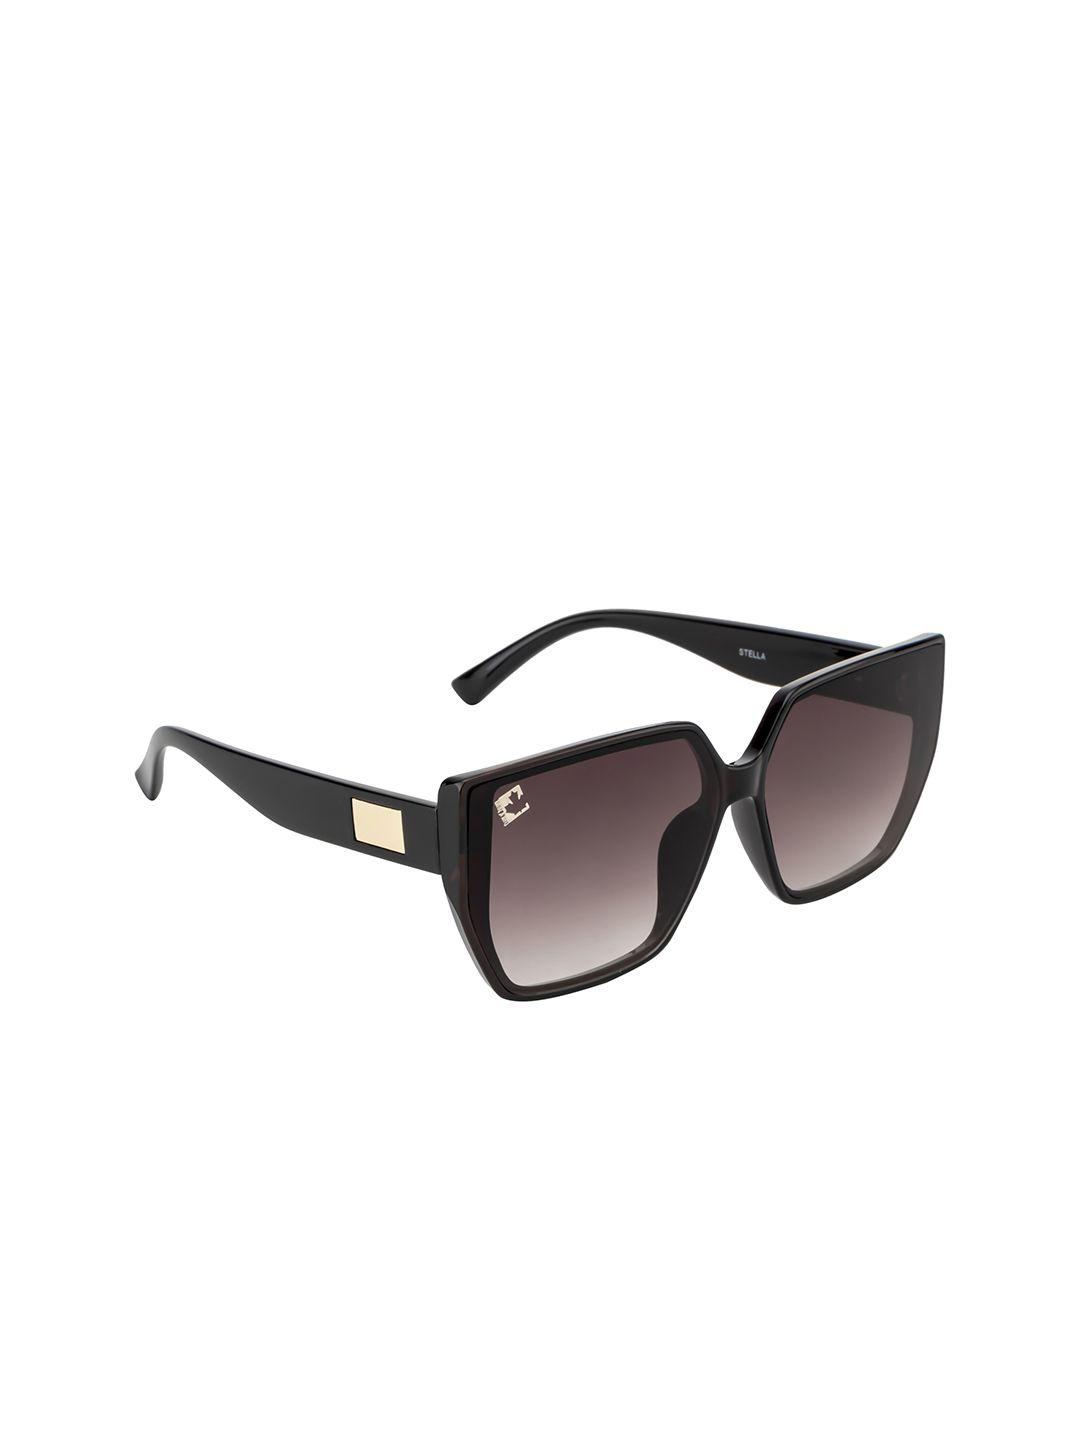 clark n palmer women square sunglasses with uv protected lens